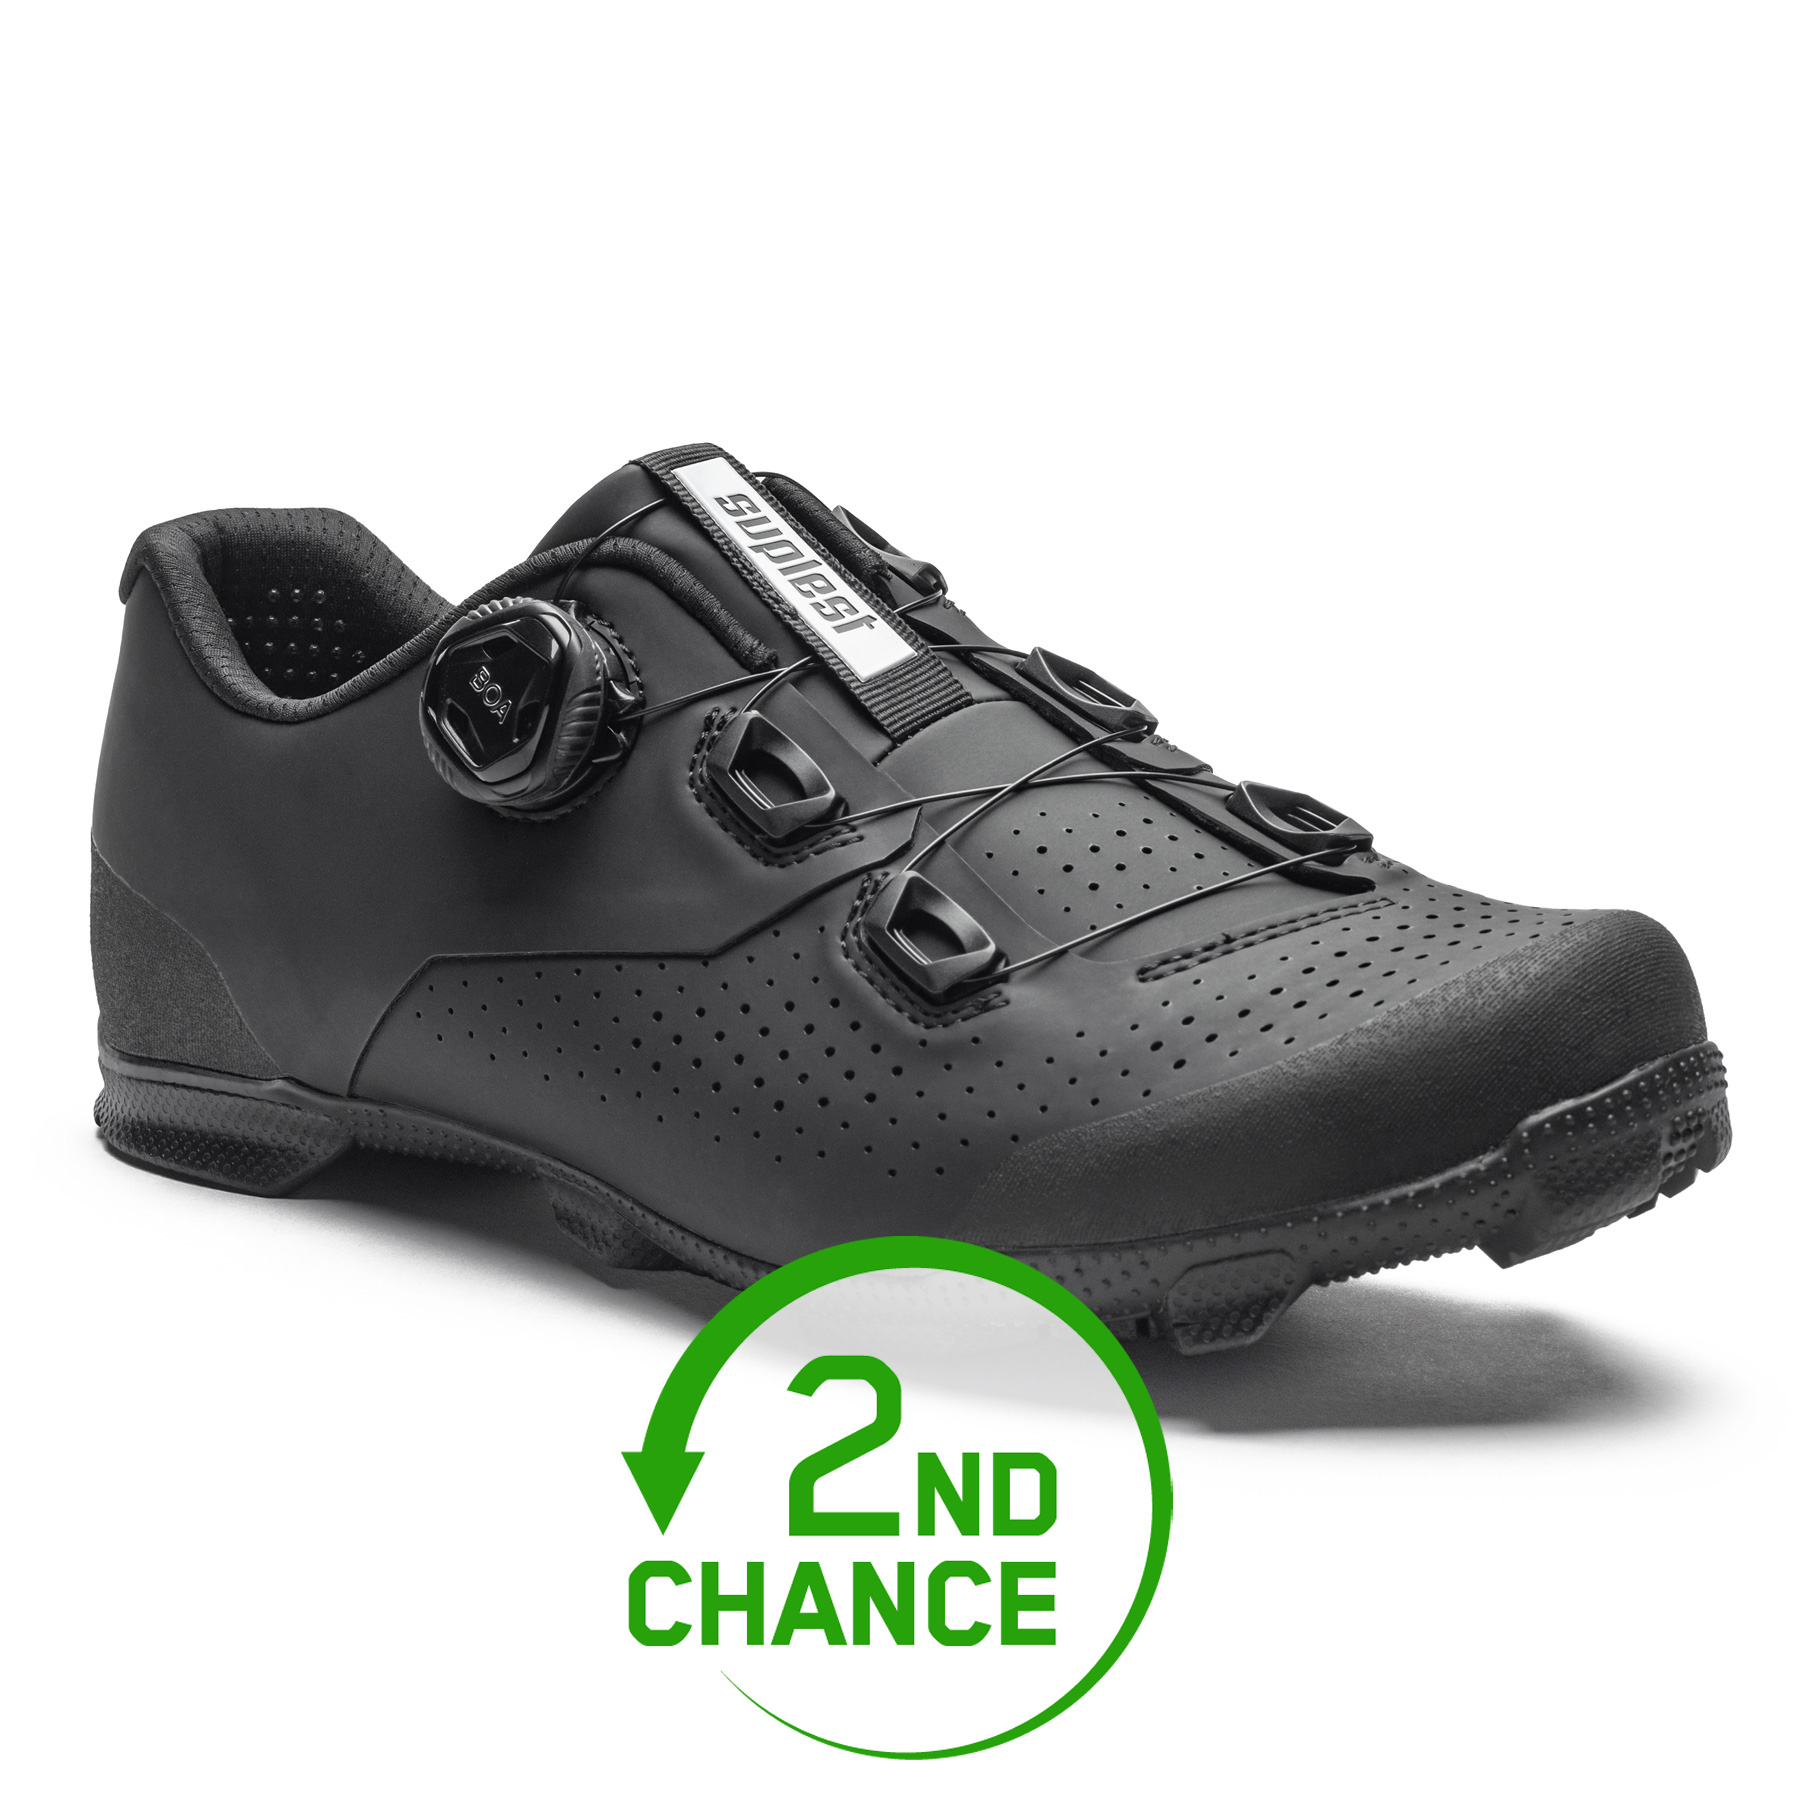 Picture of Suplest EDGE+ 2.0 Sport Mountain Series - BOA L6 MTB Shoes - black 02.048. - 2nd Choice